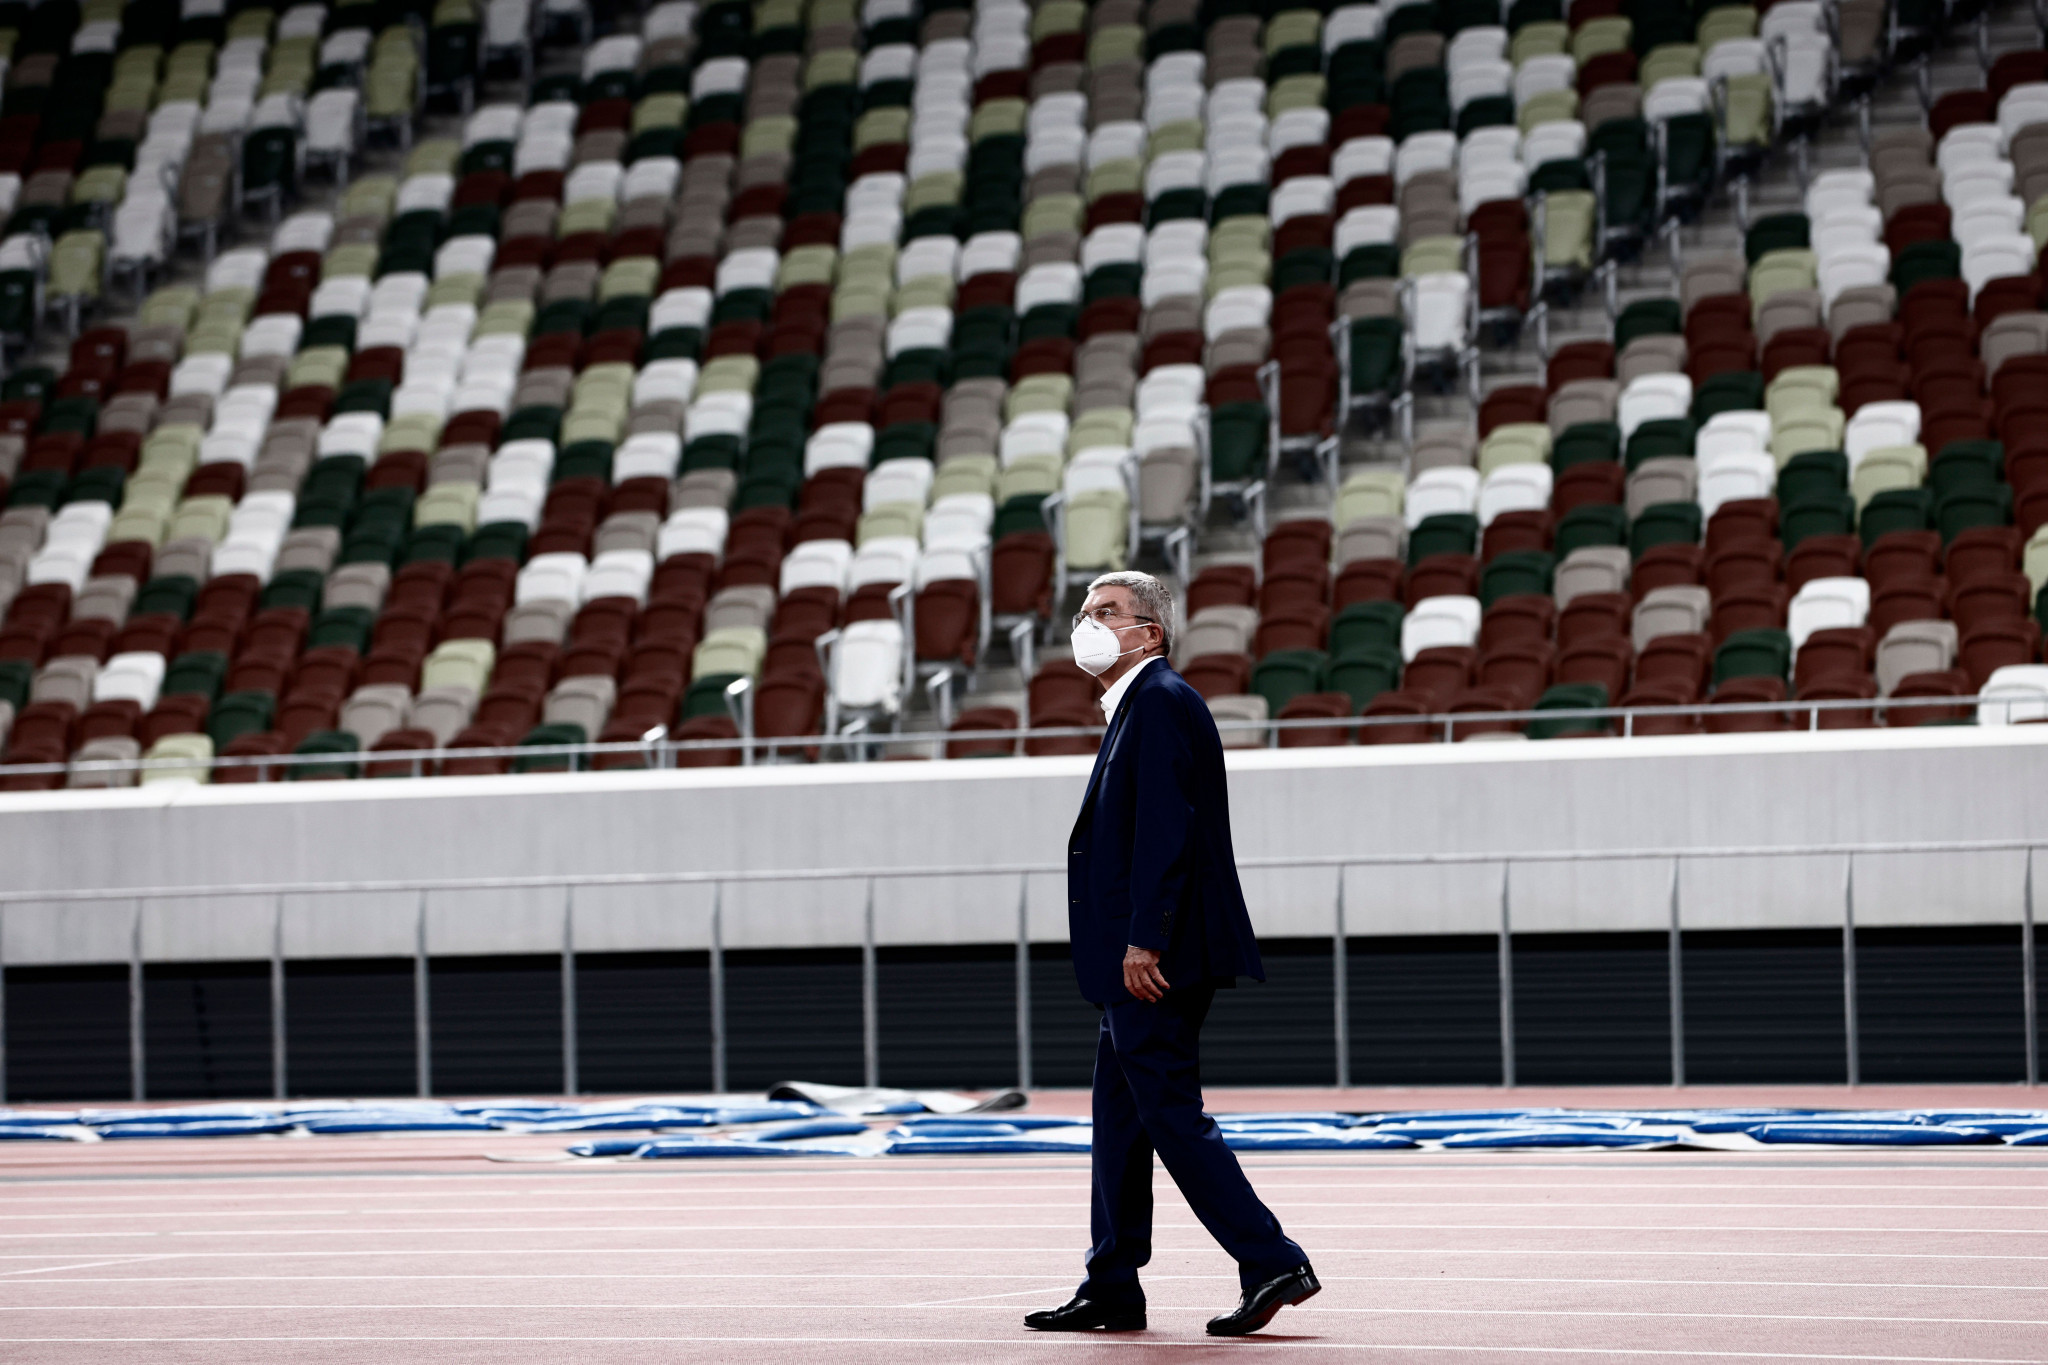 IOC President Thomas Bach said the piped in crowd noise was being used to 